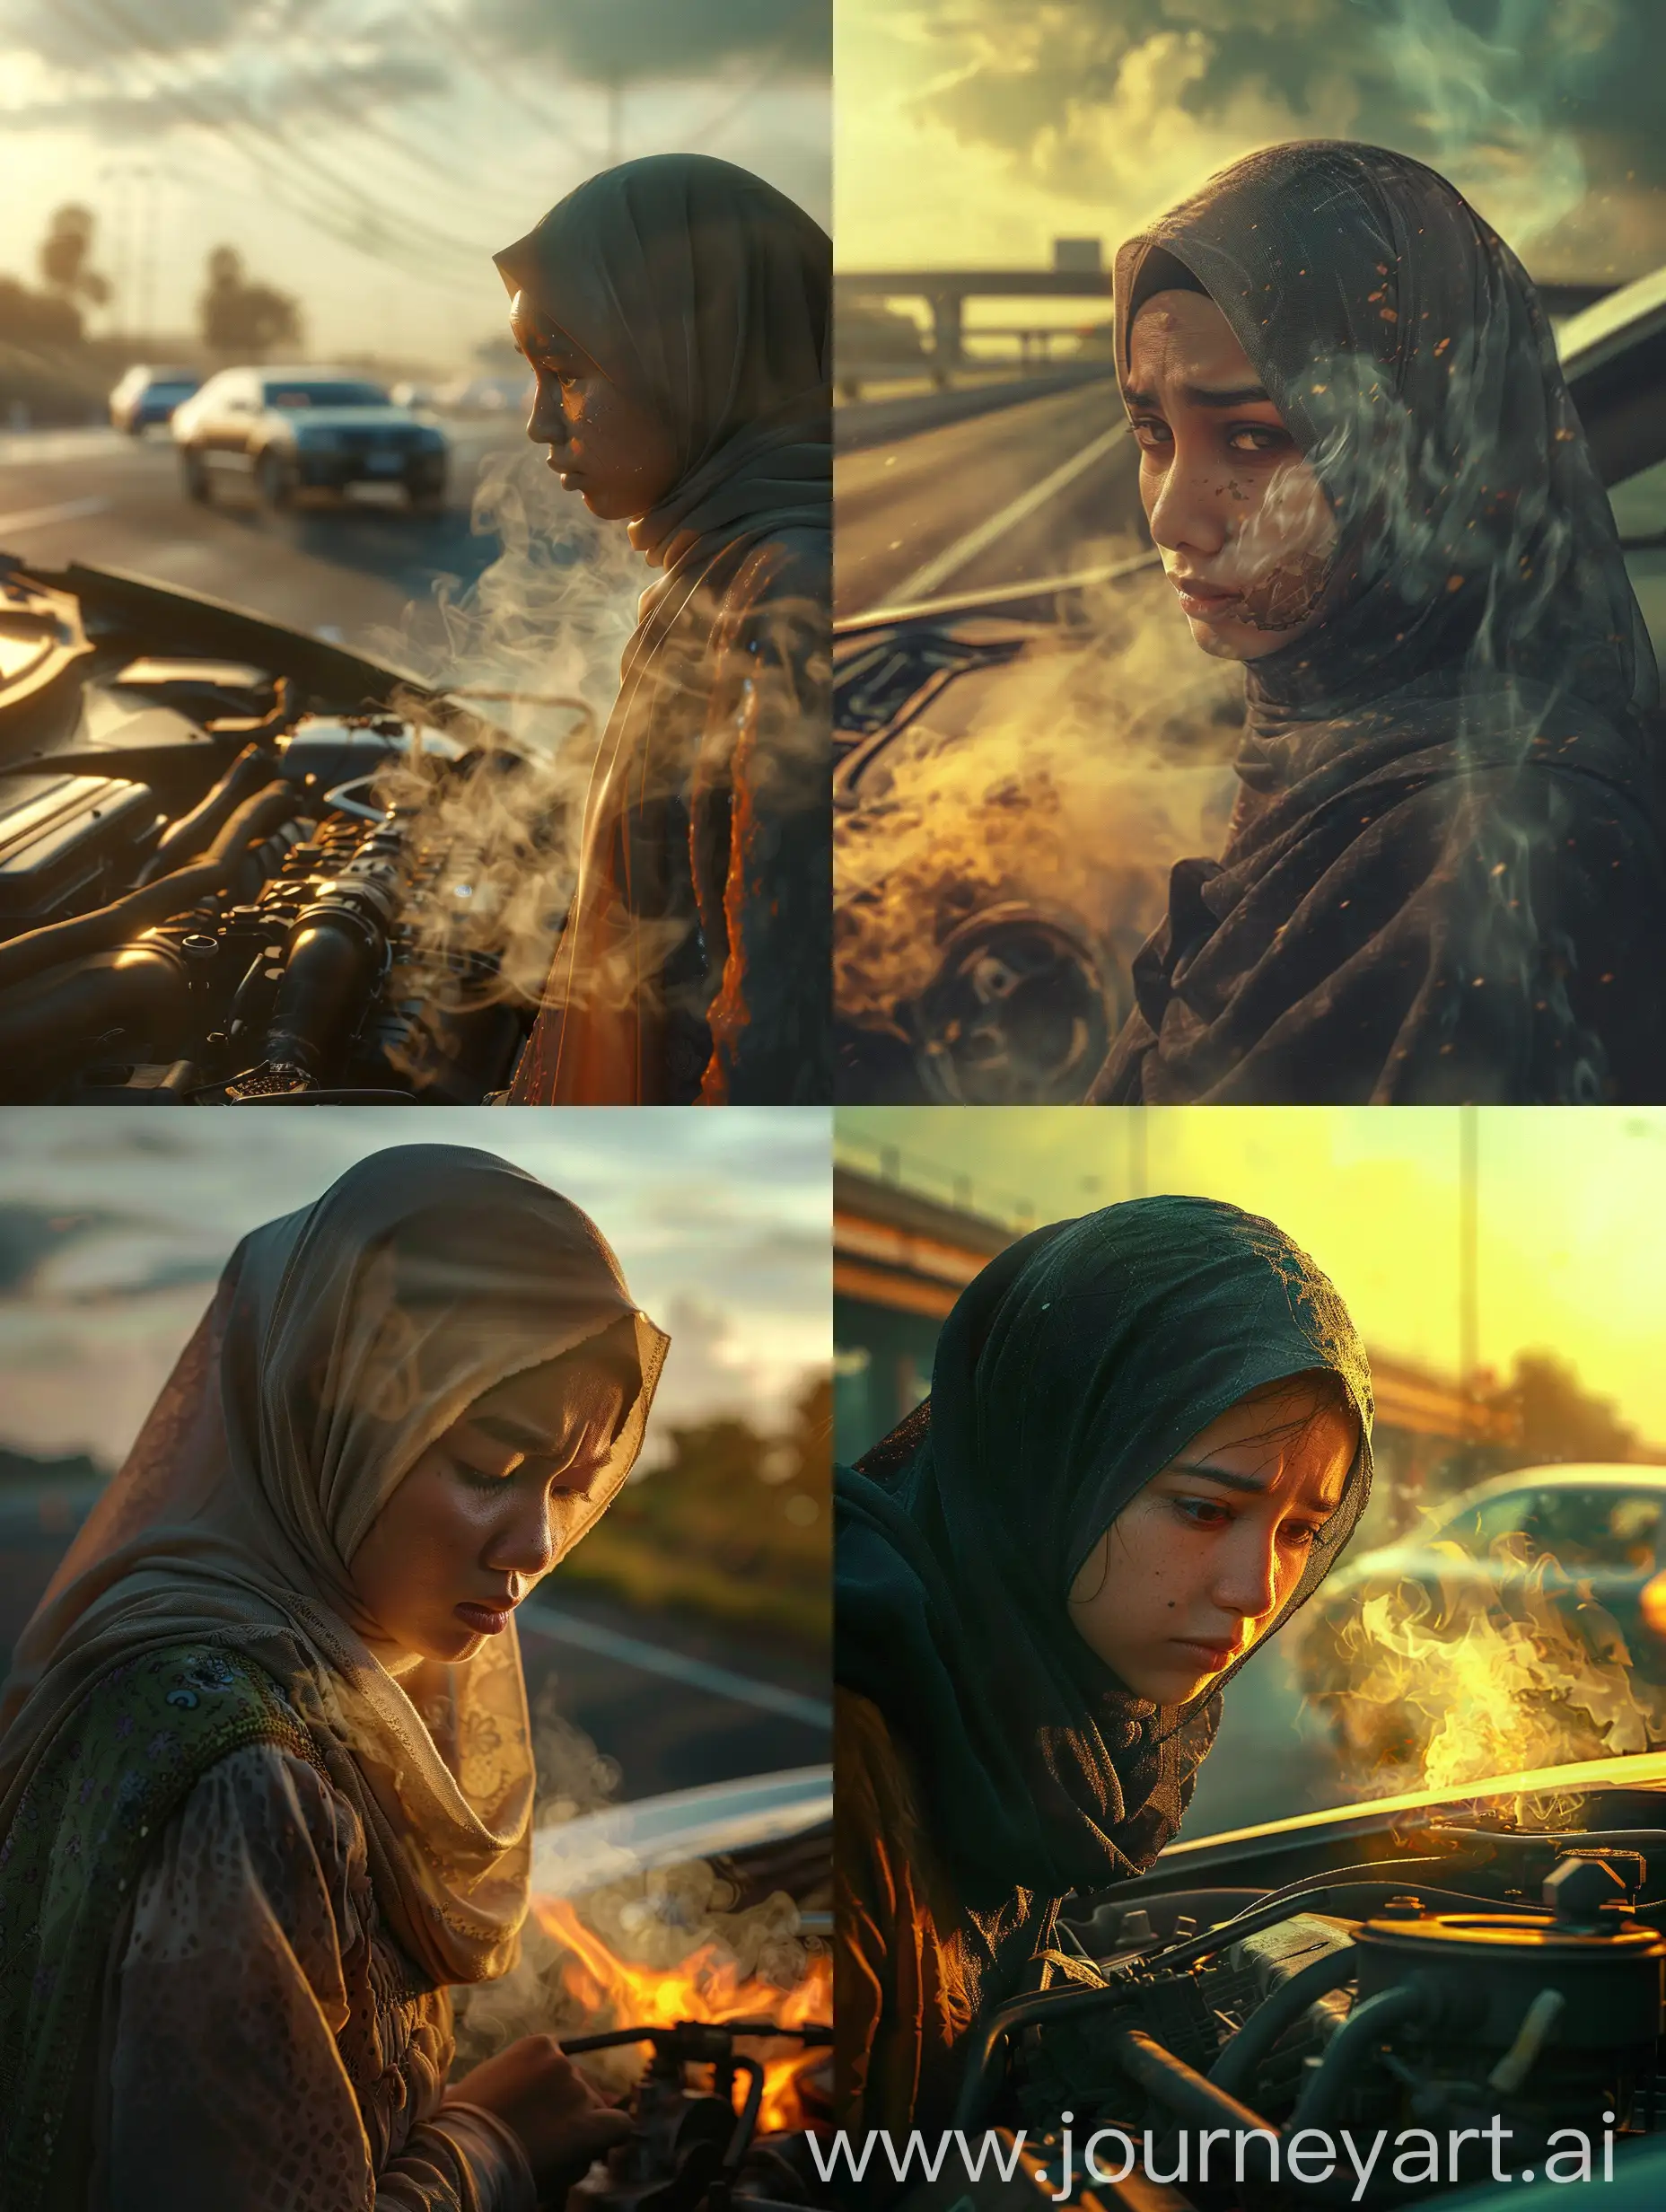 Malay-Woman-in-Hijab-with-Broken-Down-Car-on-Highway-at-Sunset